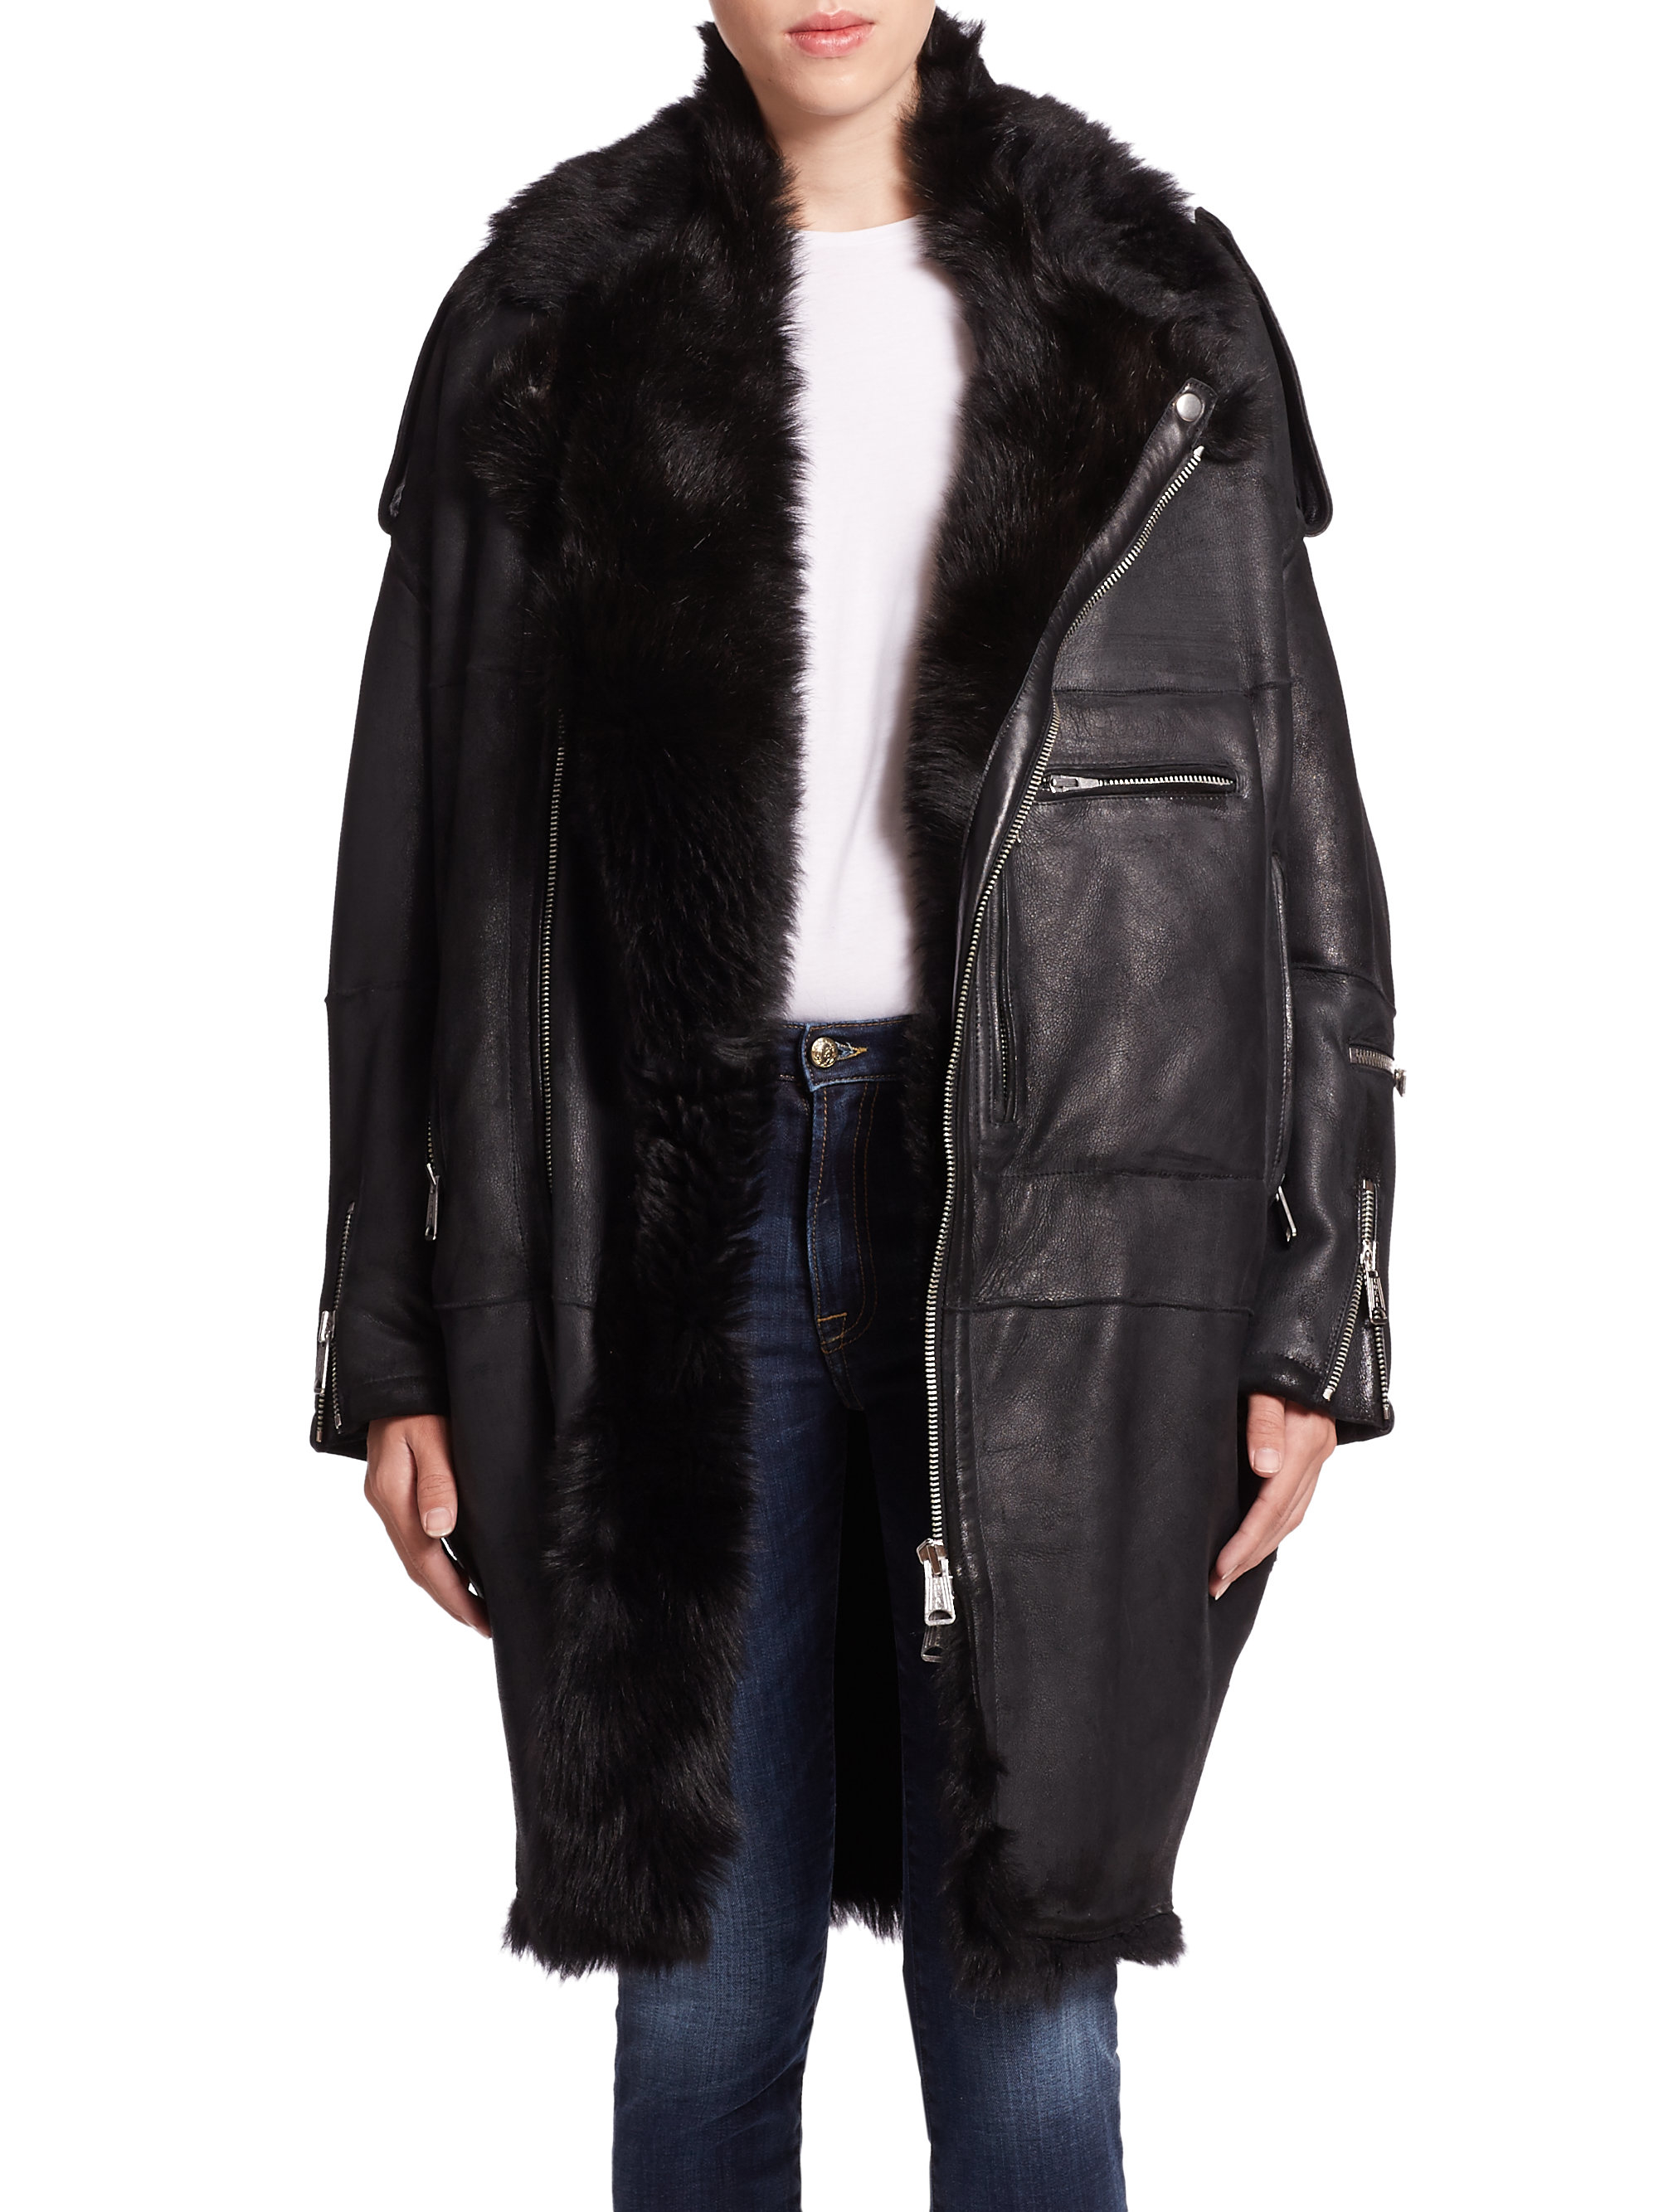 R13 Oversized Leather & Shearling Moto Jacket in Black Lyst